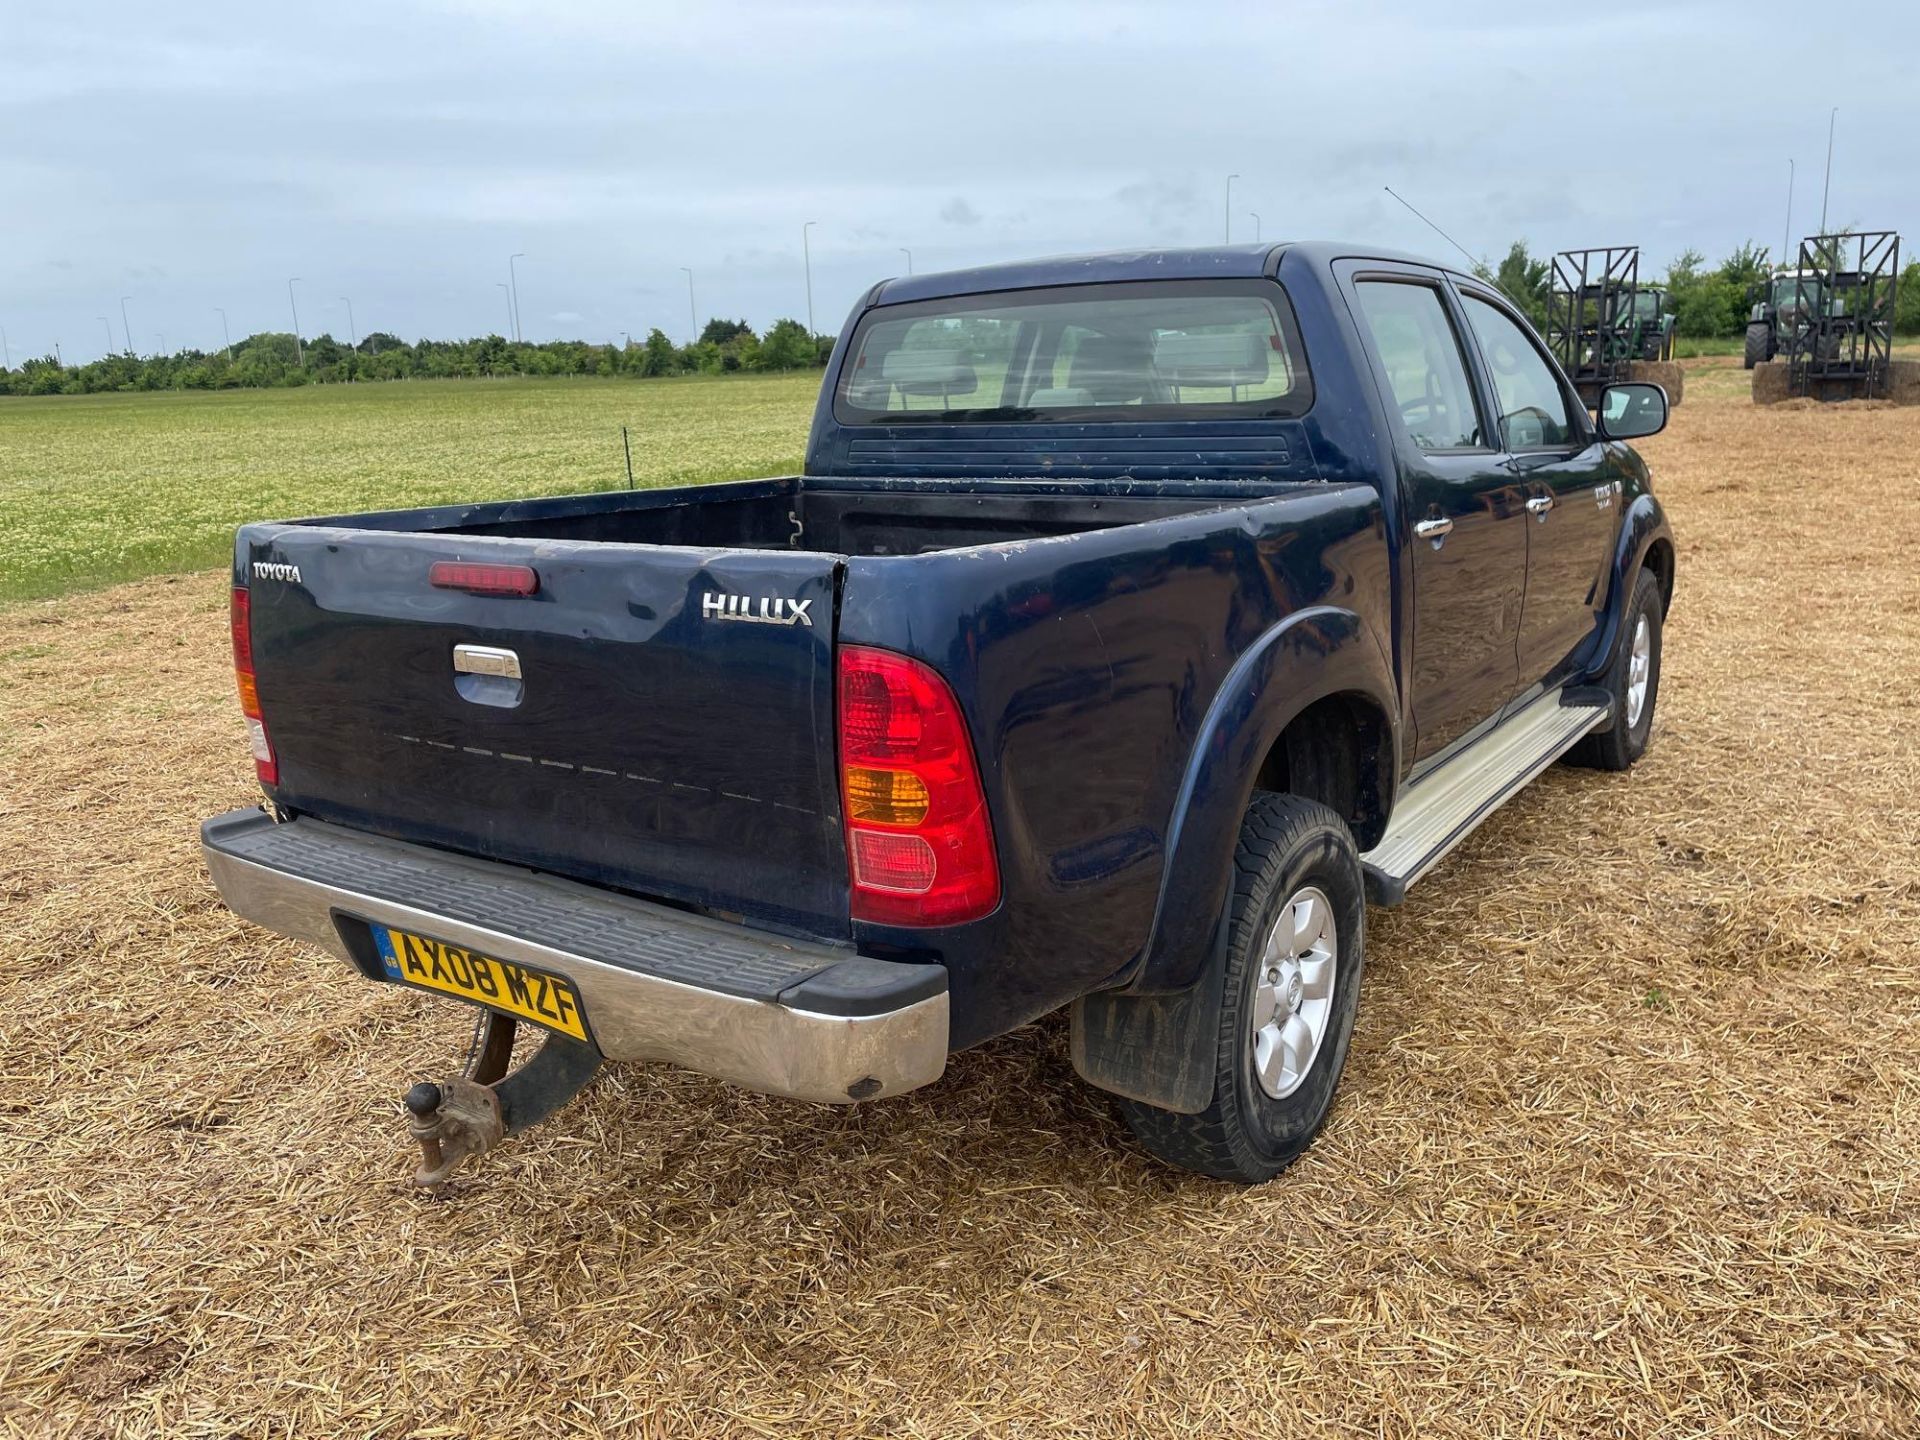 2008 Toyota Hilux HL3 D - 4D 4WD pick up, manual, diesel, blue, double cab, air conditioning, electr - Image 4 of 11